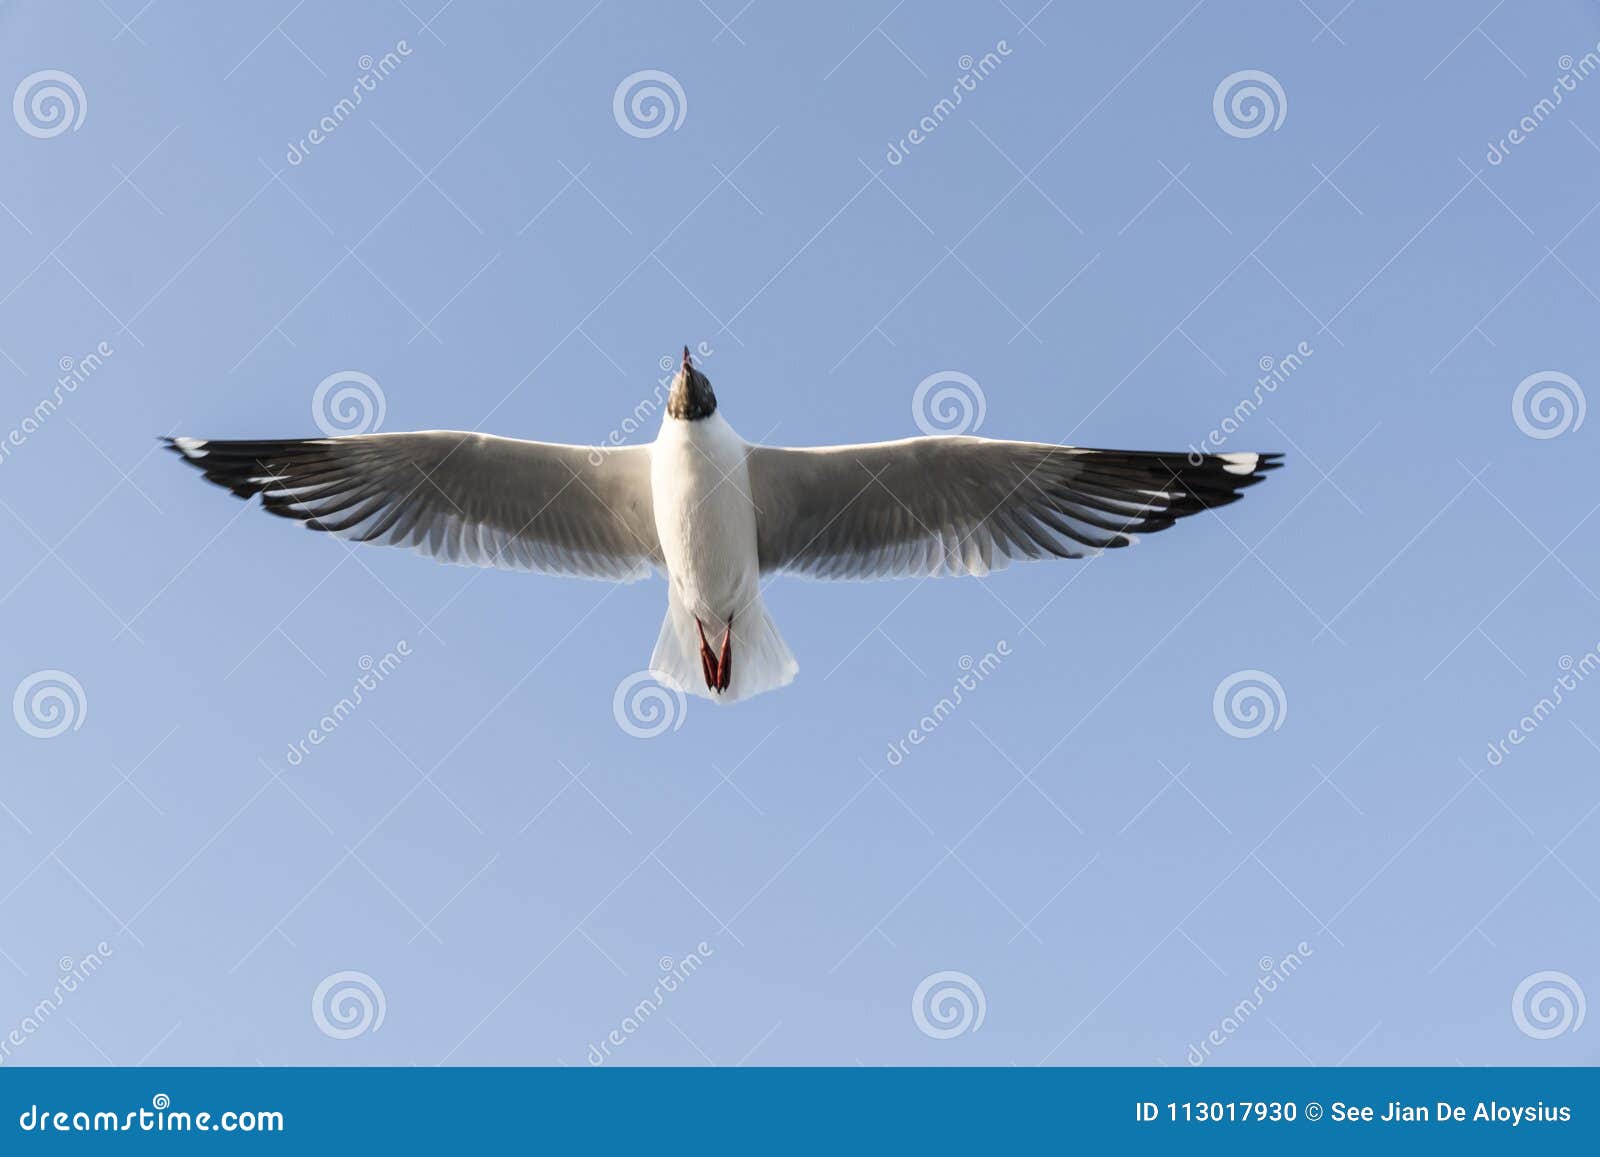 A Seagull with Its Wing Fully Spread Out in the Sky Stock Photo - Image